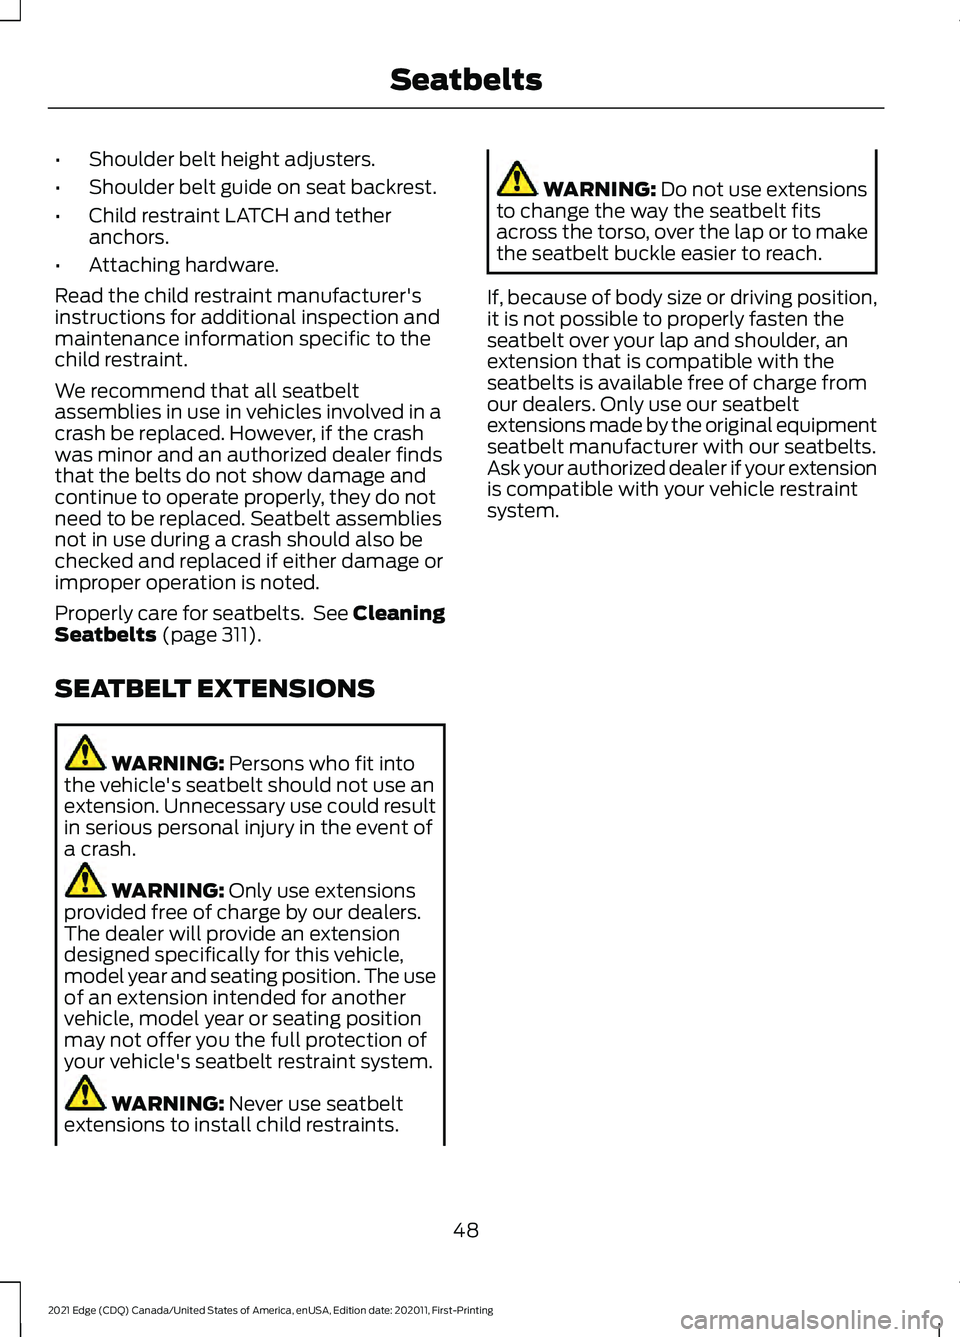 FORD EDGE 2021  Owners Manual •
Shoulder belt height adjusters.
• Shoulder belt guide on seat backrest.
• Child restraint LATCH and tether
anchors.
• Attaching hardware.
Read the child restraint manufacturer's
instruct